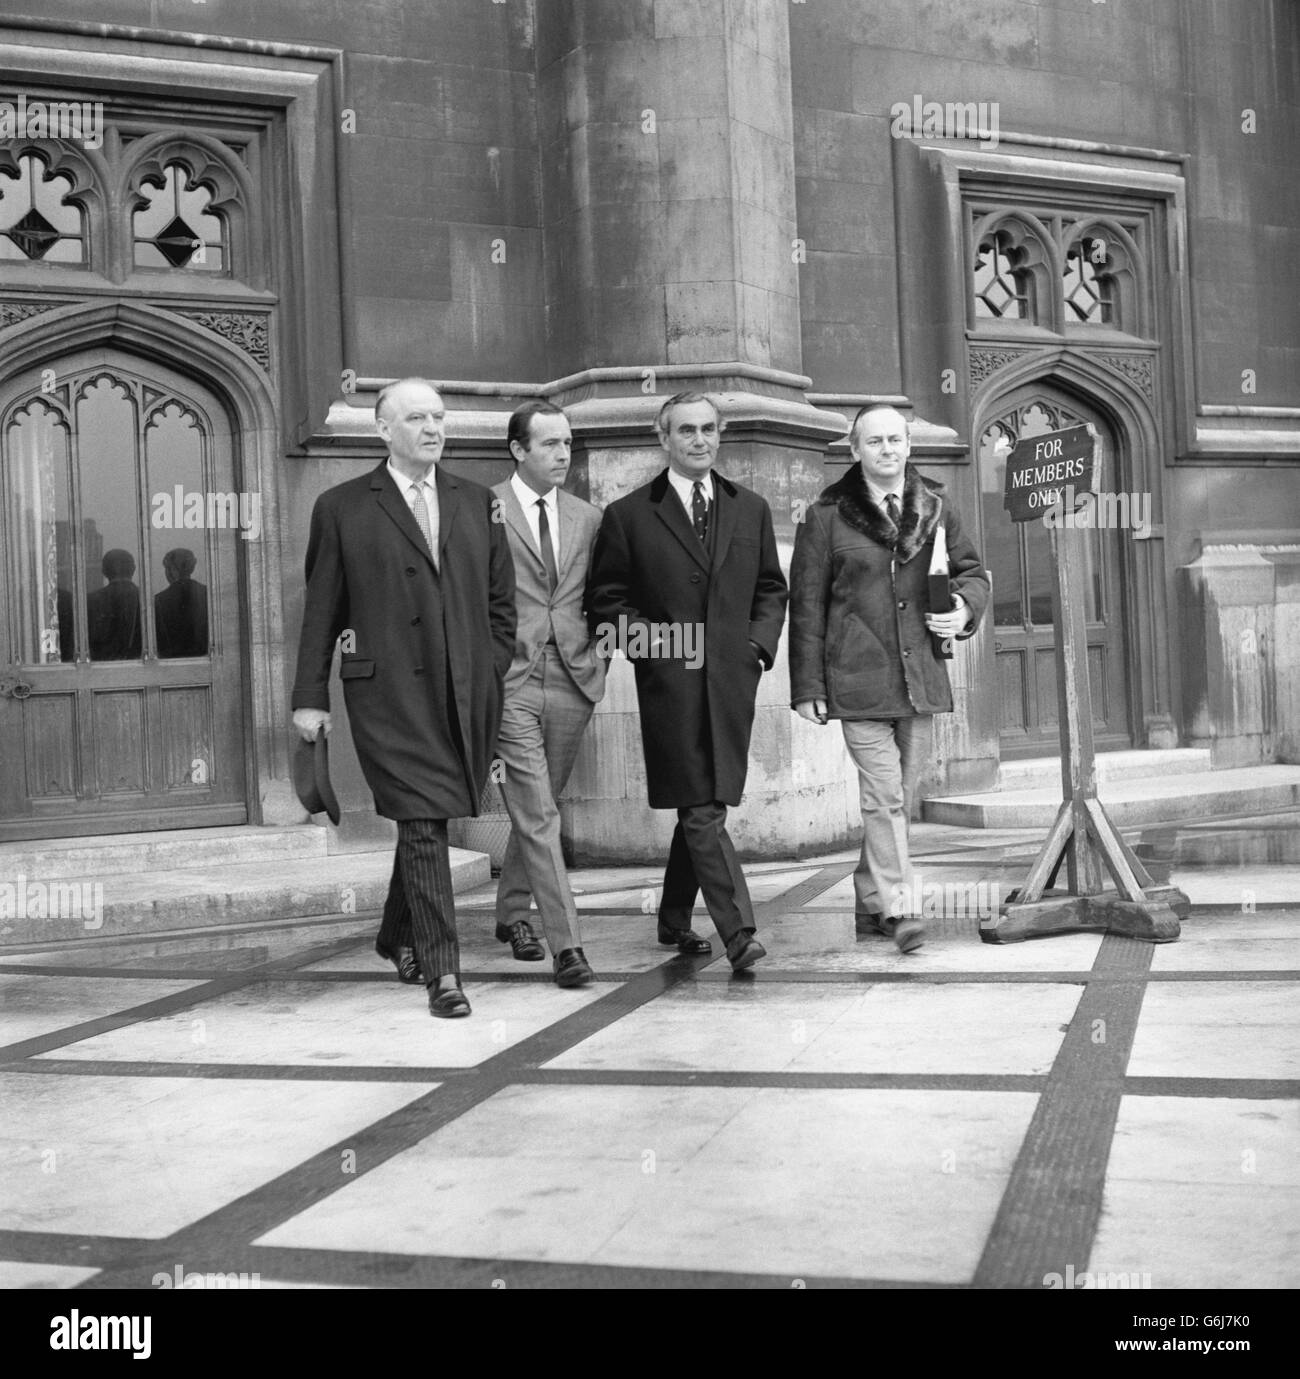 Maurice Edelman (3rd left), Labour Member of Parliament for Coventry, walks on to the Terrace of the House with John Jacobs, Anglia Television's Head of Drama, and actors Eric Portman and Ian Hendry. Portman and Hendry are to portray the main characters in the Anglia National Network play 'The Crossfire', adapted from Edelman's novel 'The Fratricides'. Stock Photo